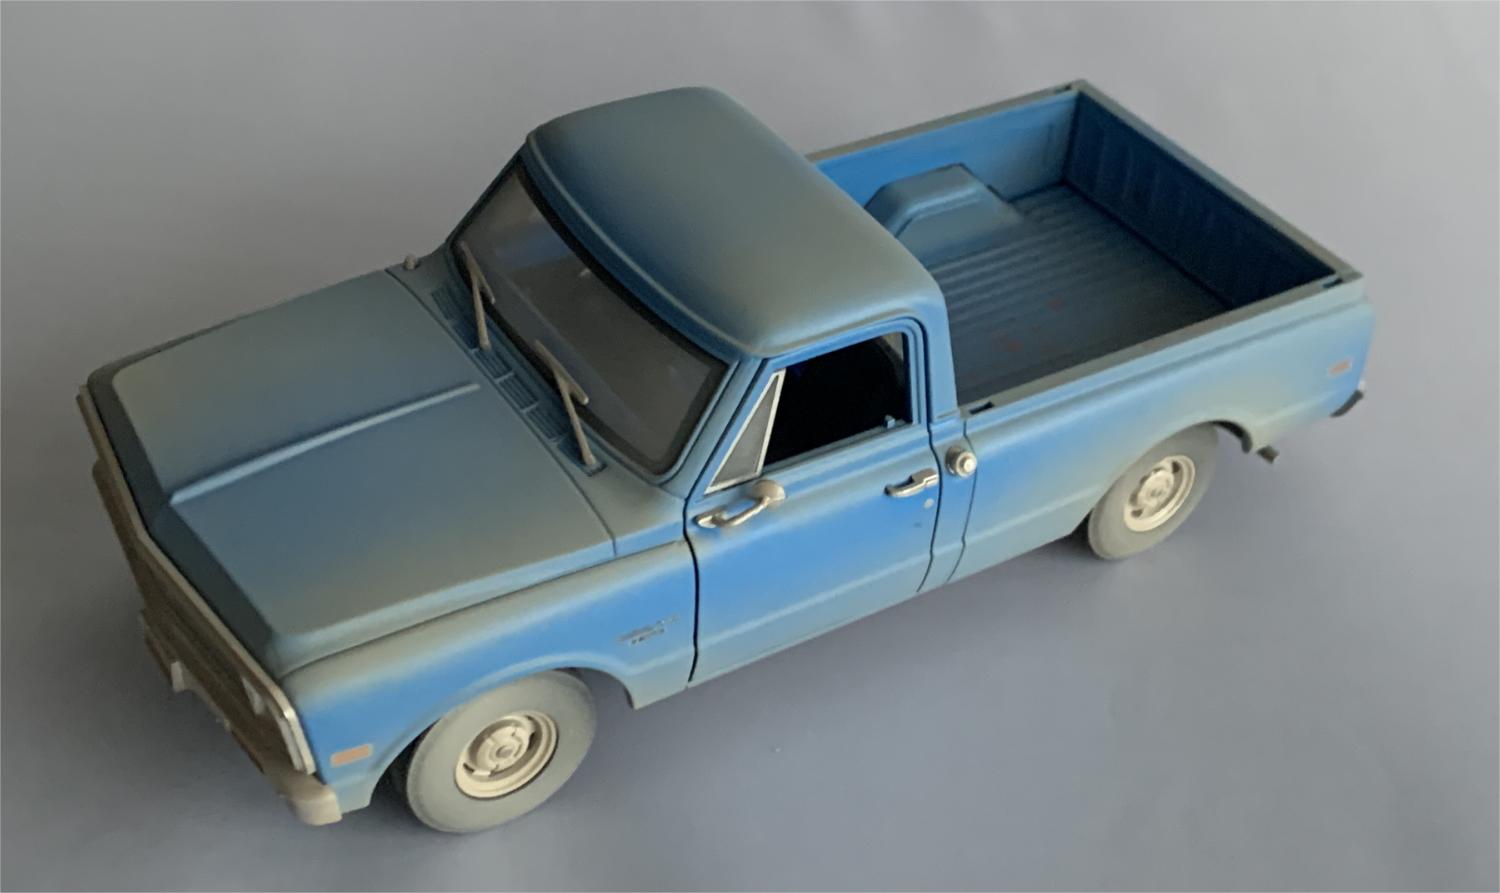 The Texas Chainsaw Massacre, 1971 Chevrolet C10 in light blue (dusty) 1:24 scale model from Greenlight, limited edition